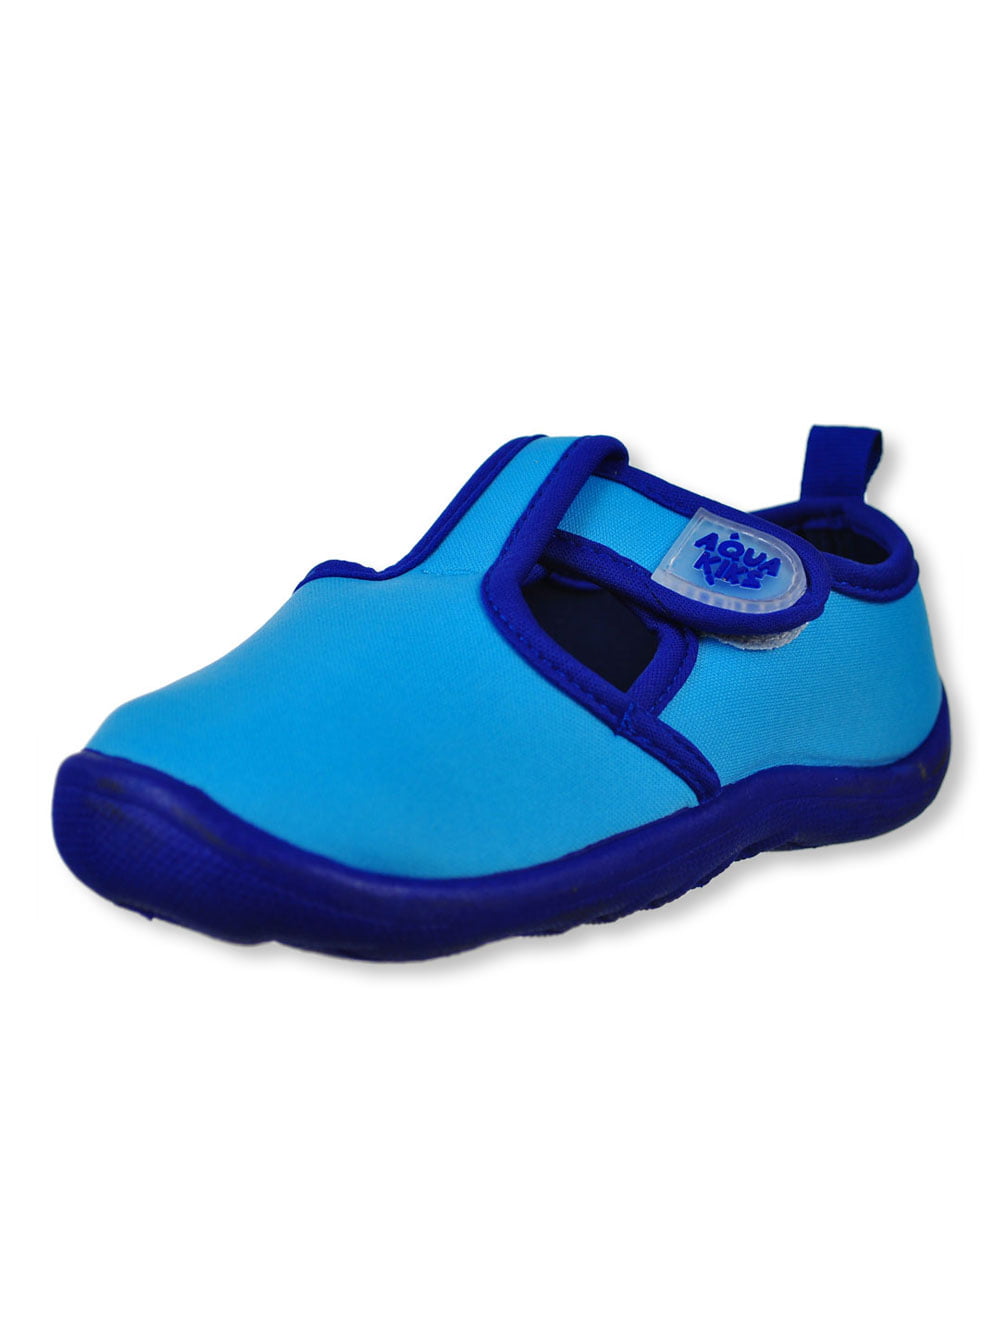 comfy water shoes